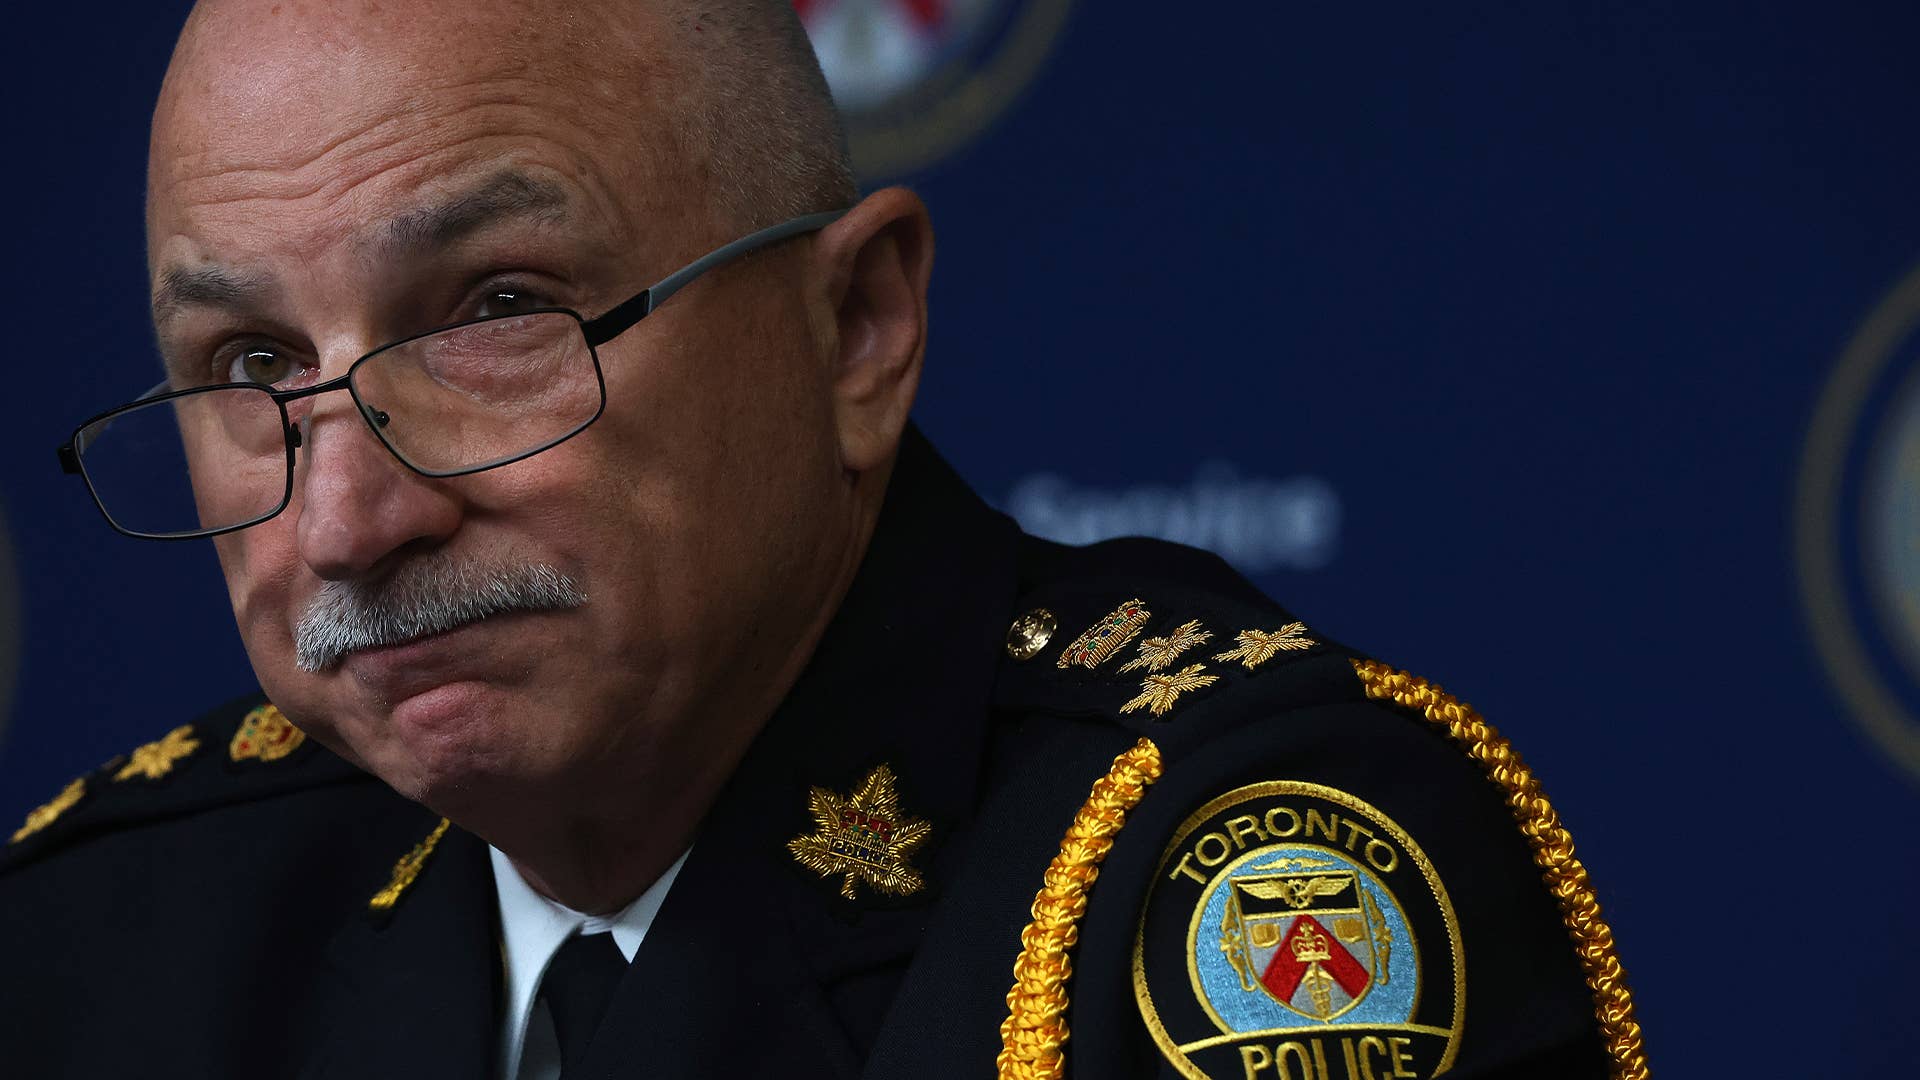 Toronto Police Data Reveals Black People Face Most Use of Force